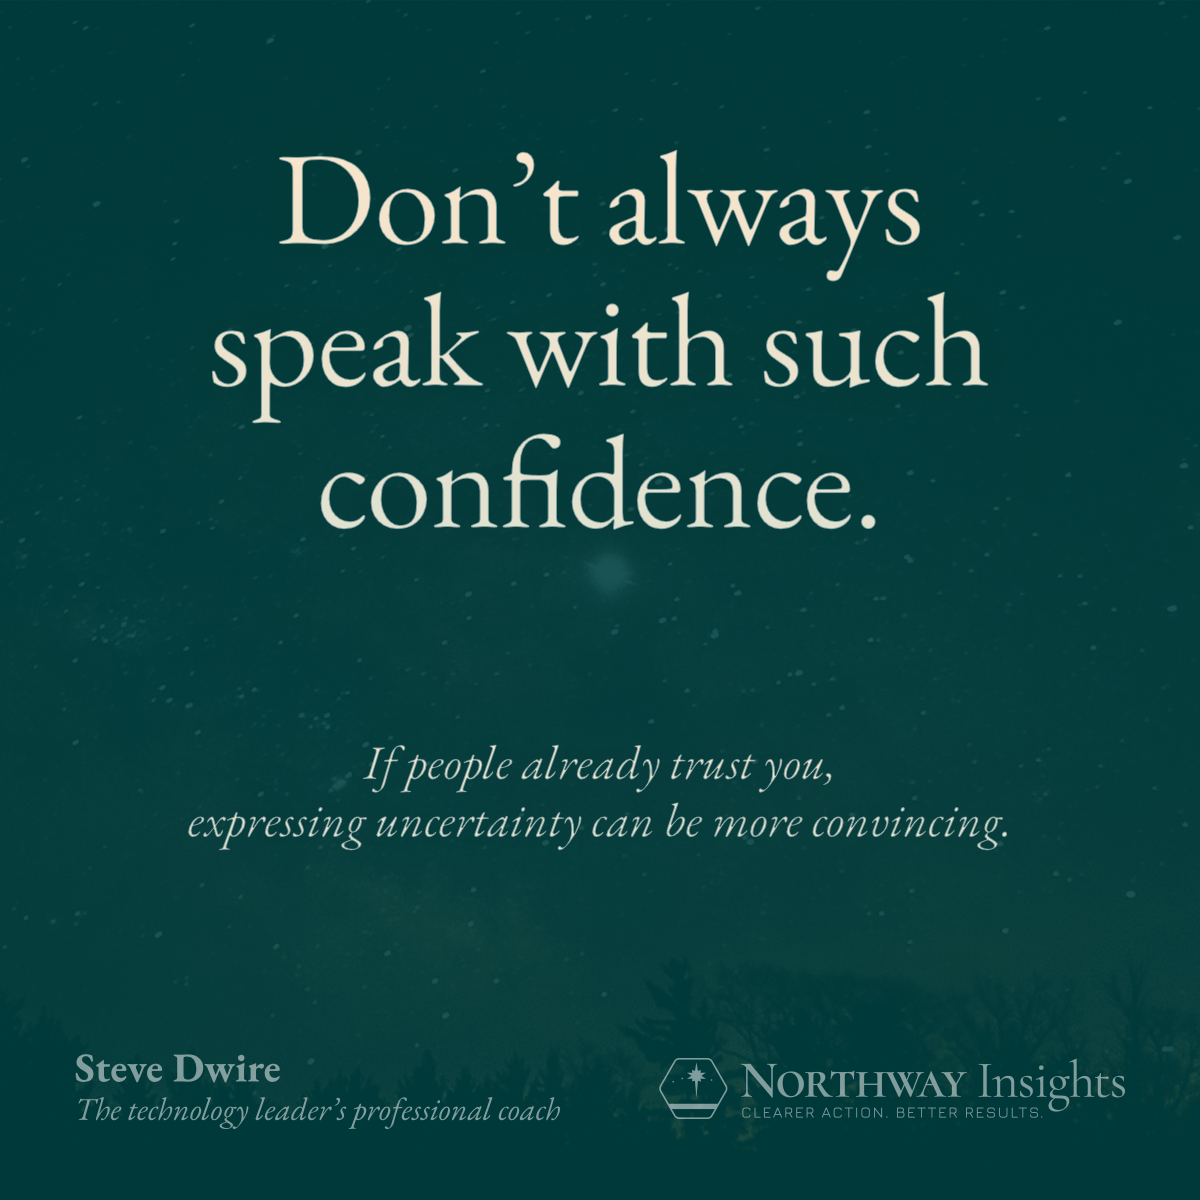 Don't always speak with such confidence. (If people already trust you, expressing uncertainty can be more convincing.)